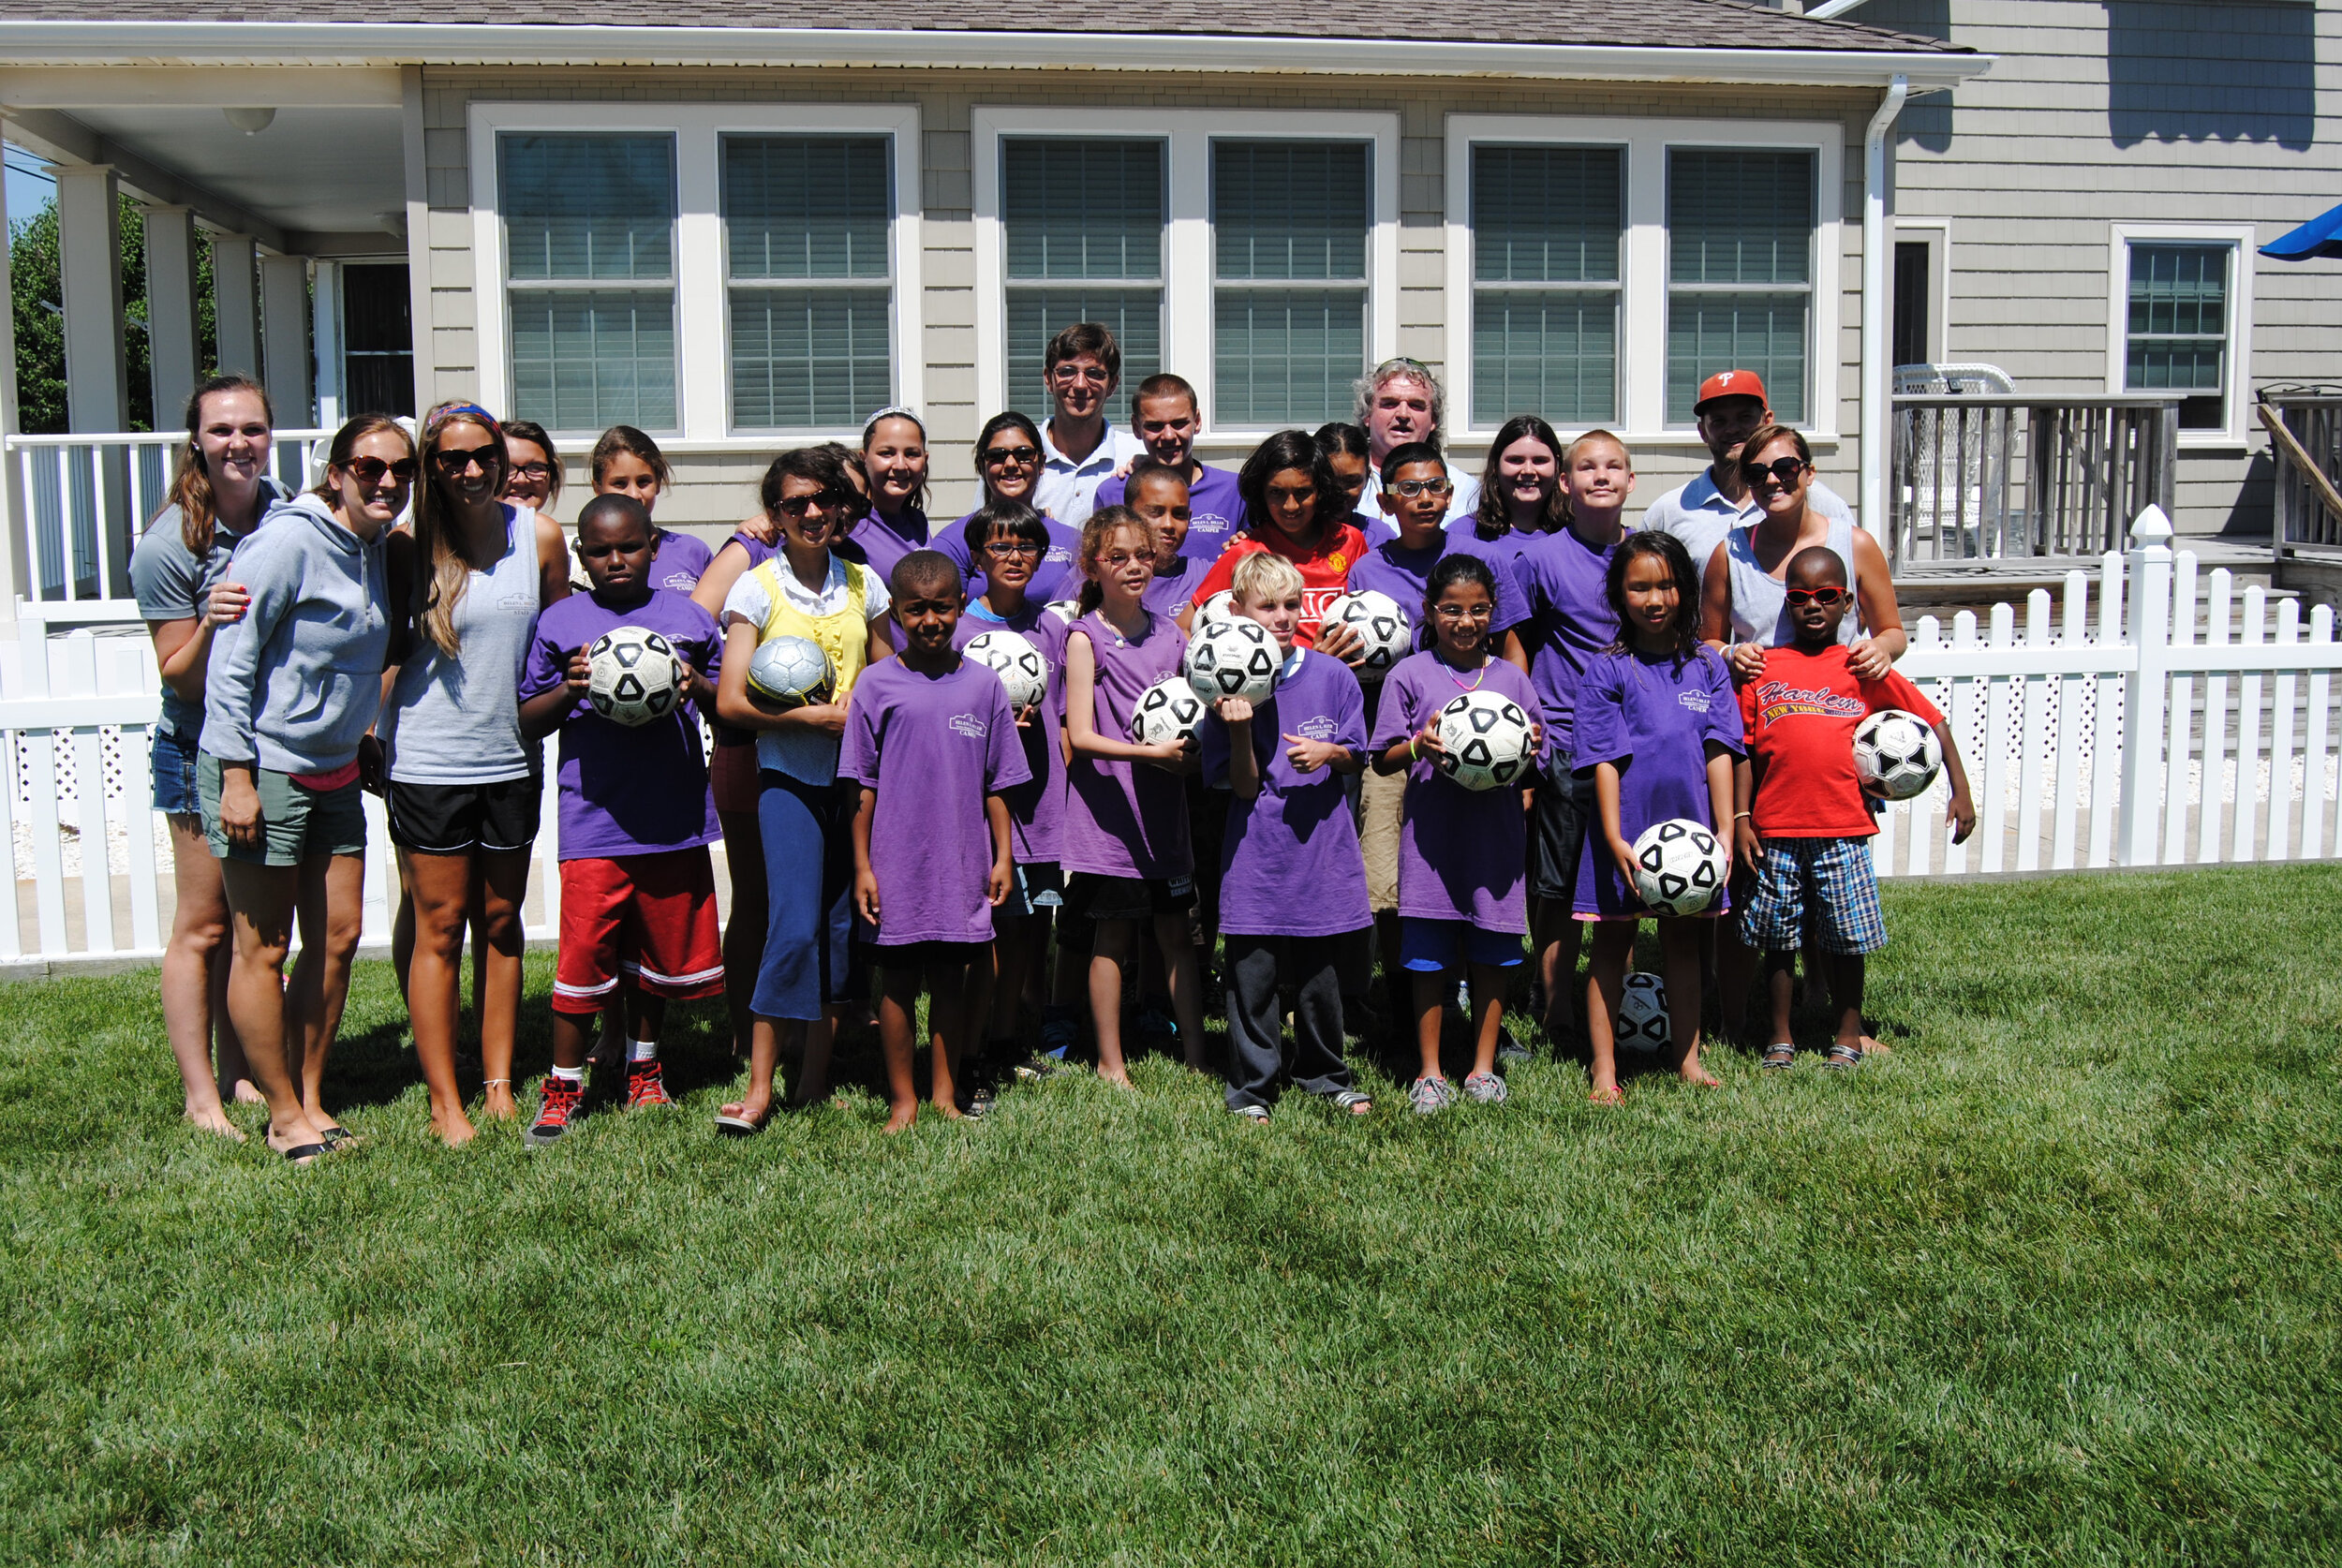 Kevin MacFarlane poses with campers and counselors after giving a  soccer clinic at the Helen L. Diller Vacation Home for Blind Children in 2014.